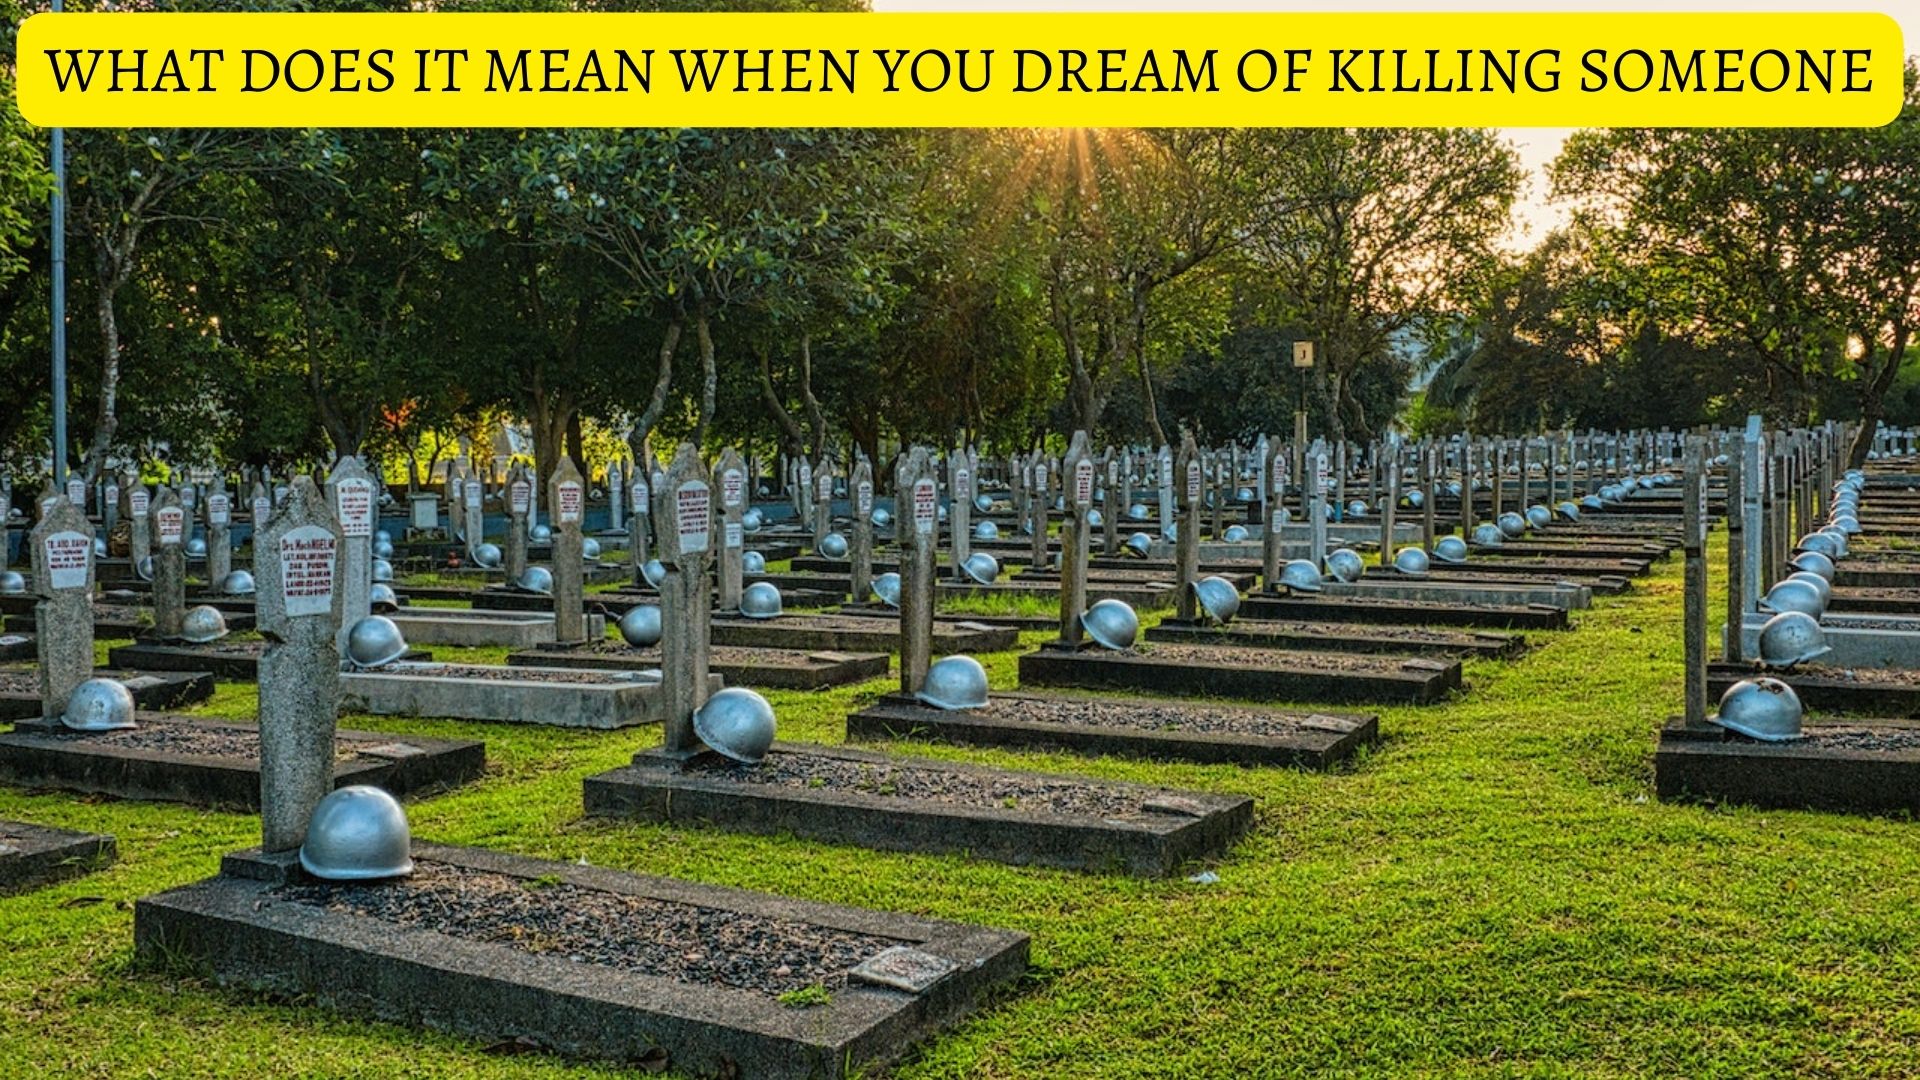 What Does It Mean When You Dream Of Killing Someone?